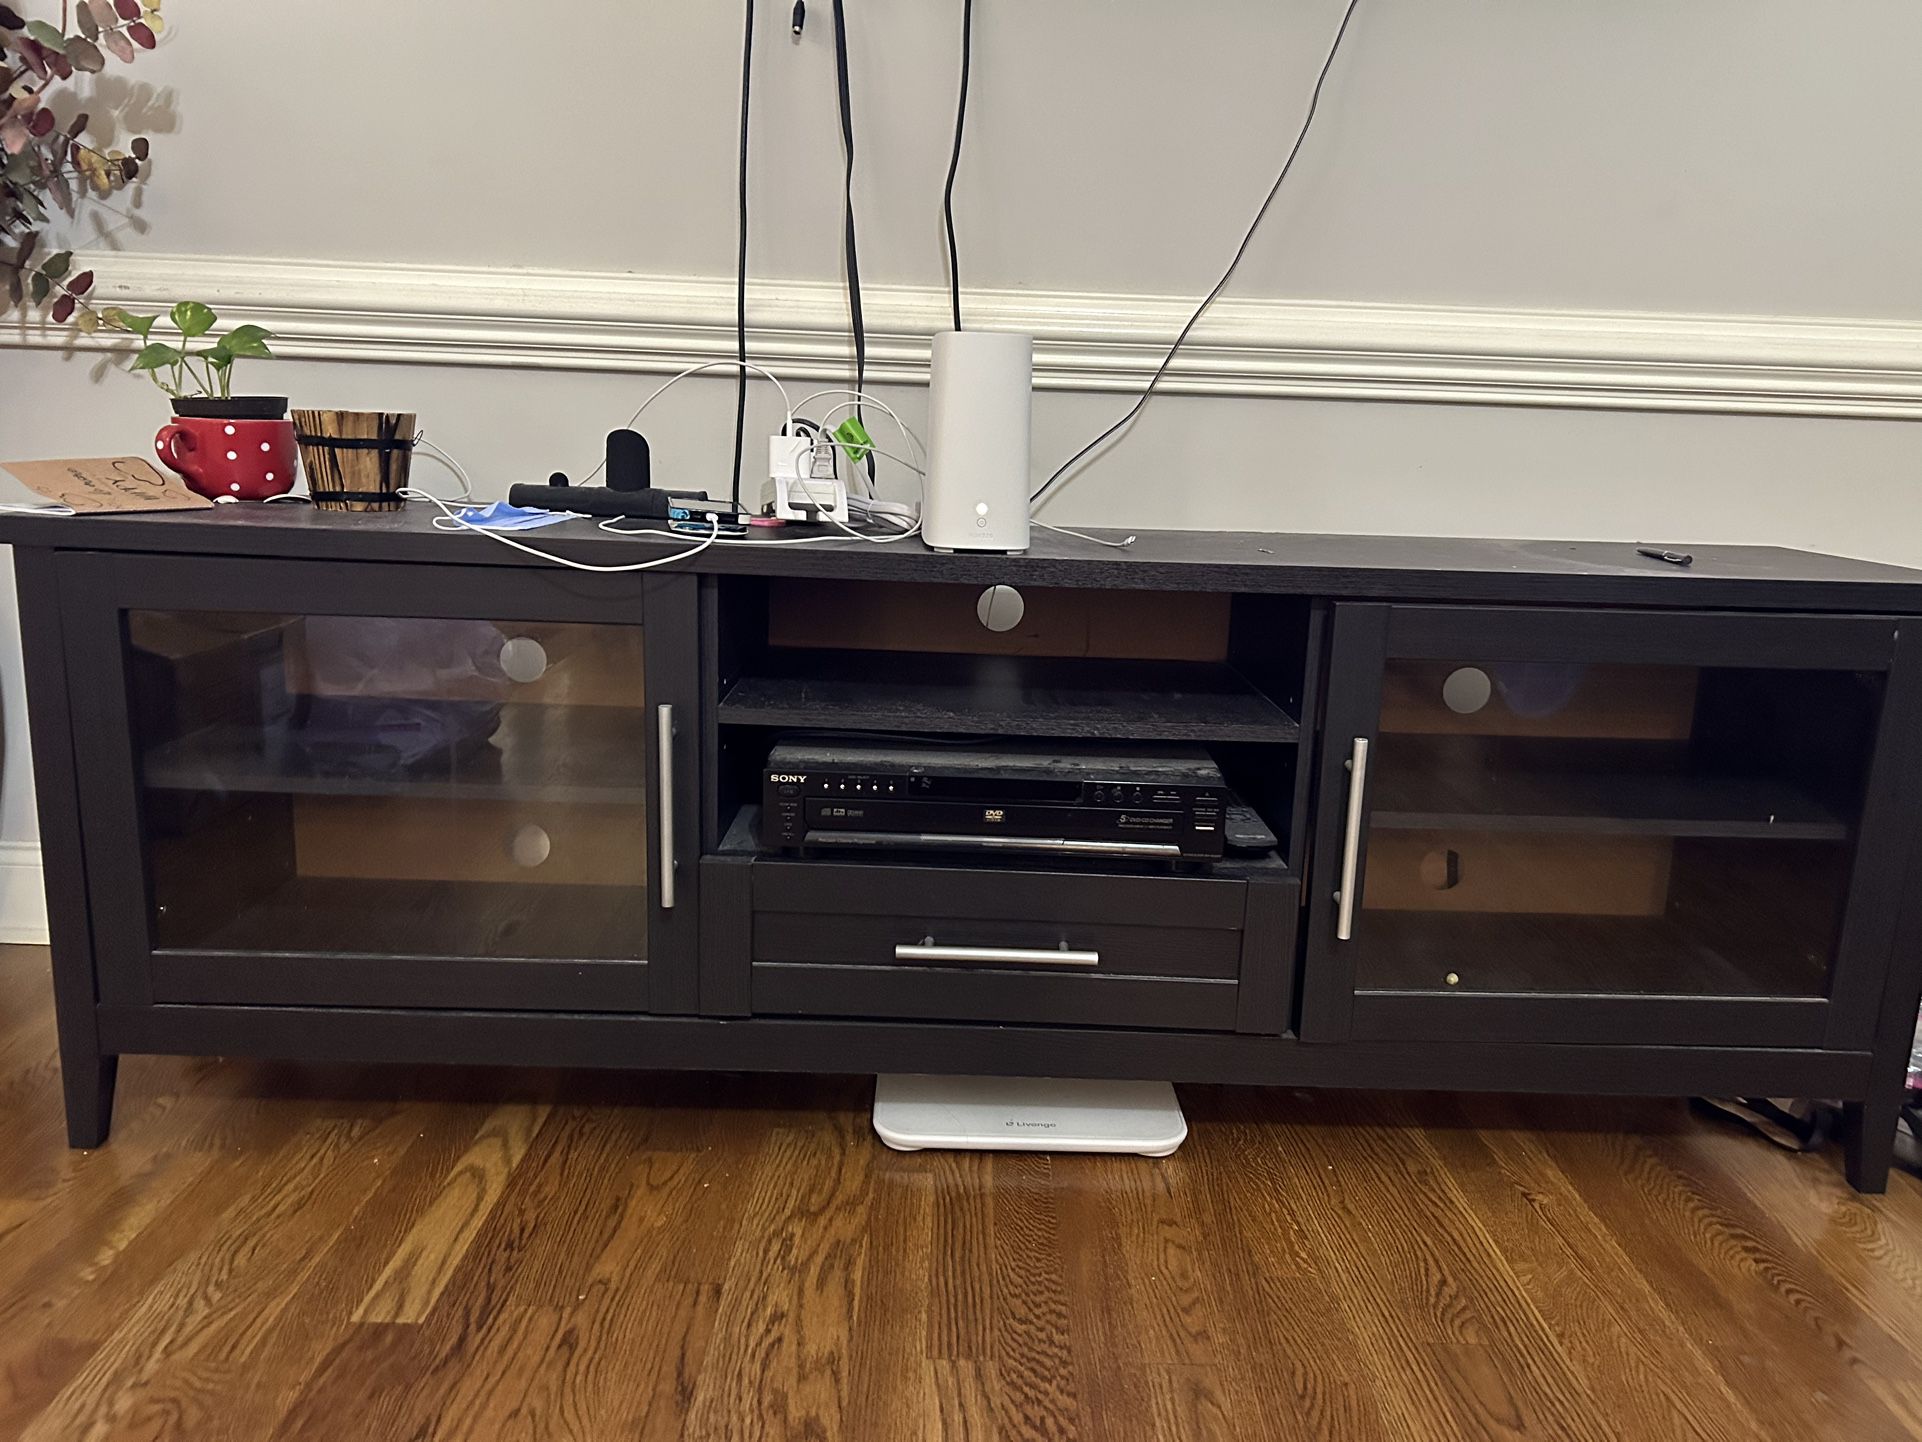 TV Stand for Sale